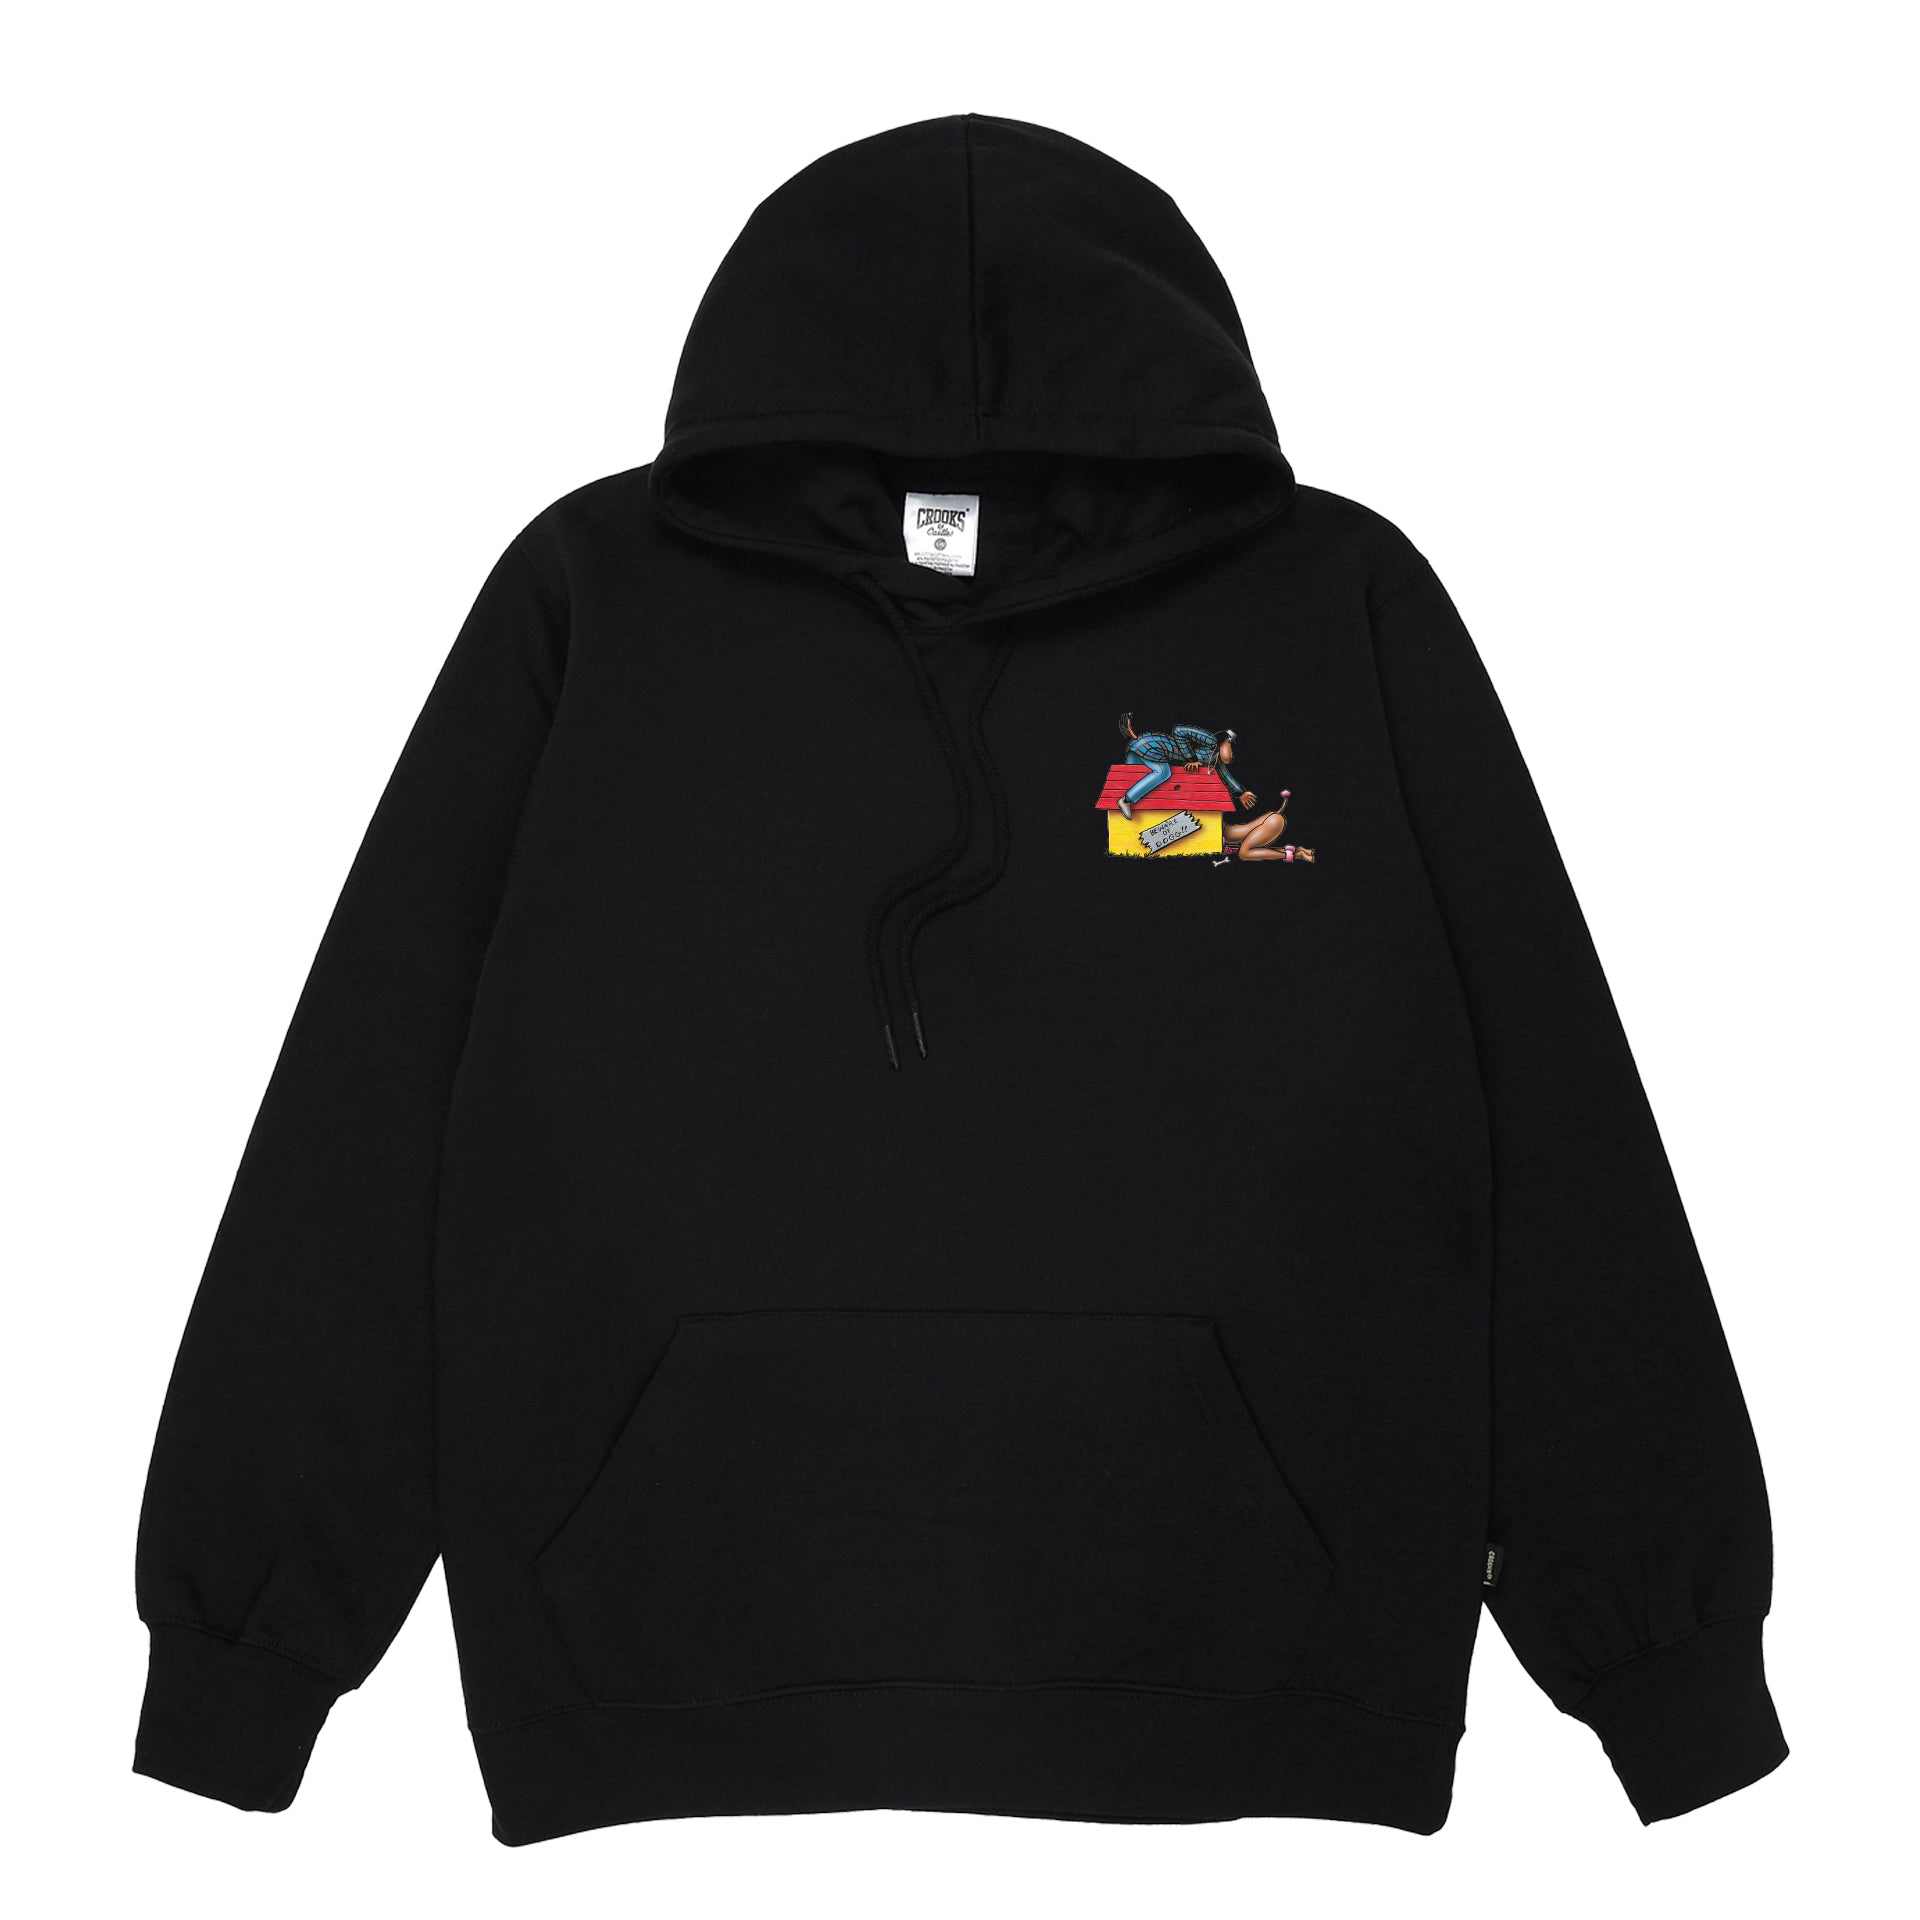 Doggystyle 30 Year Limited Edition Hoodie